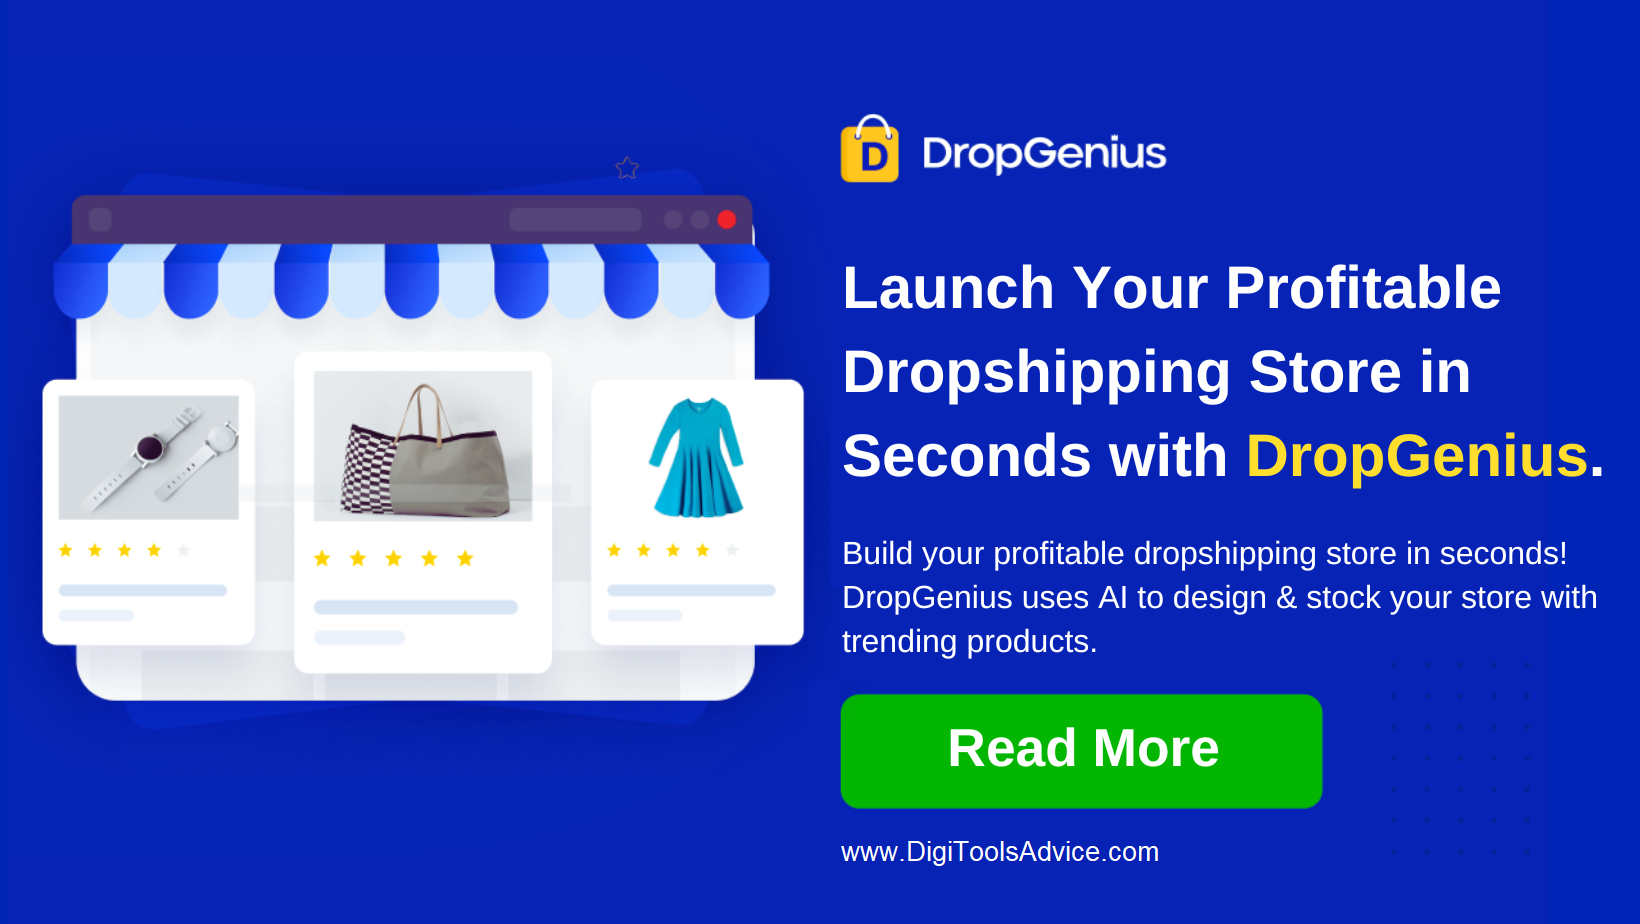 Launch Your Profitable Dropshipping Store in Seconds with DropGenius.